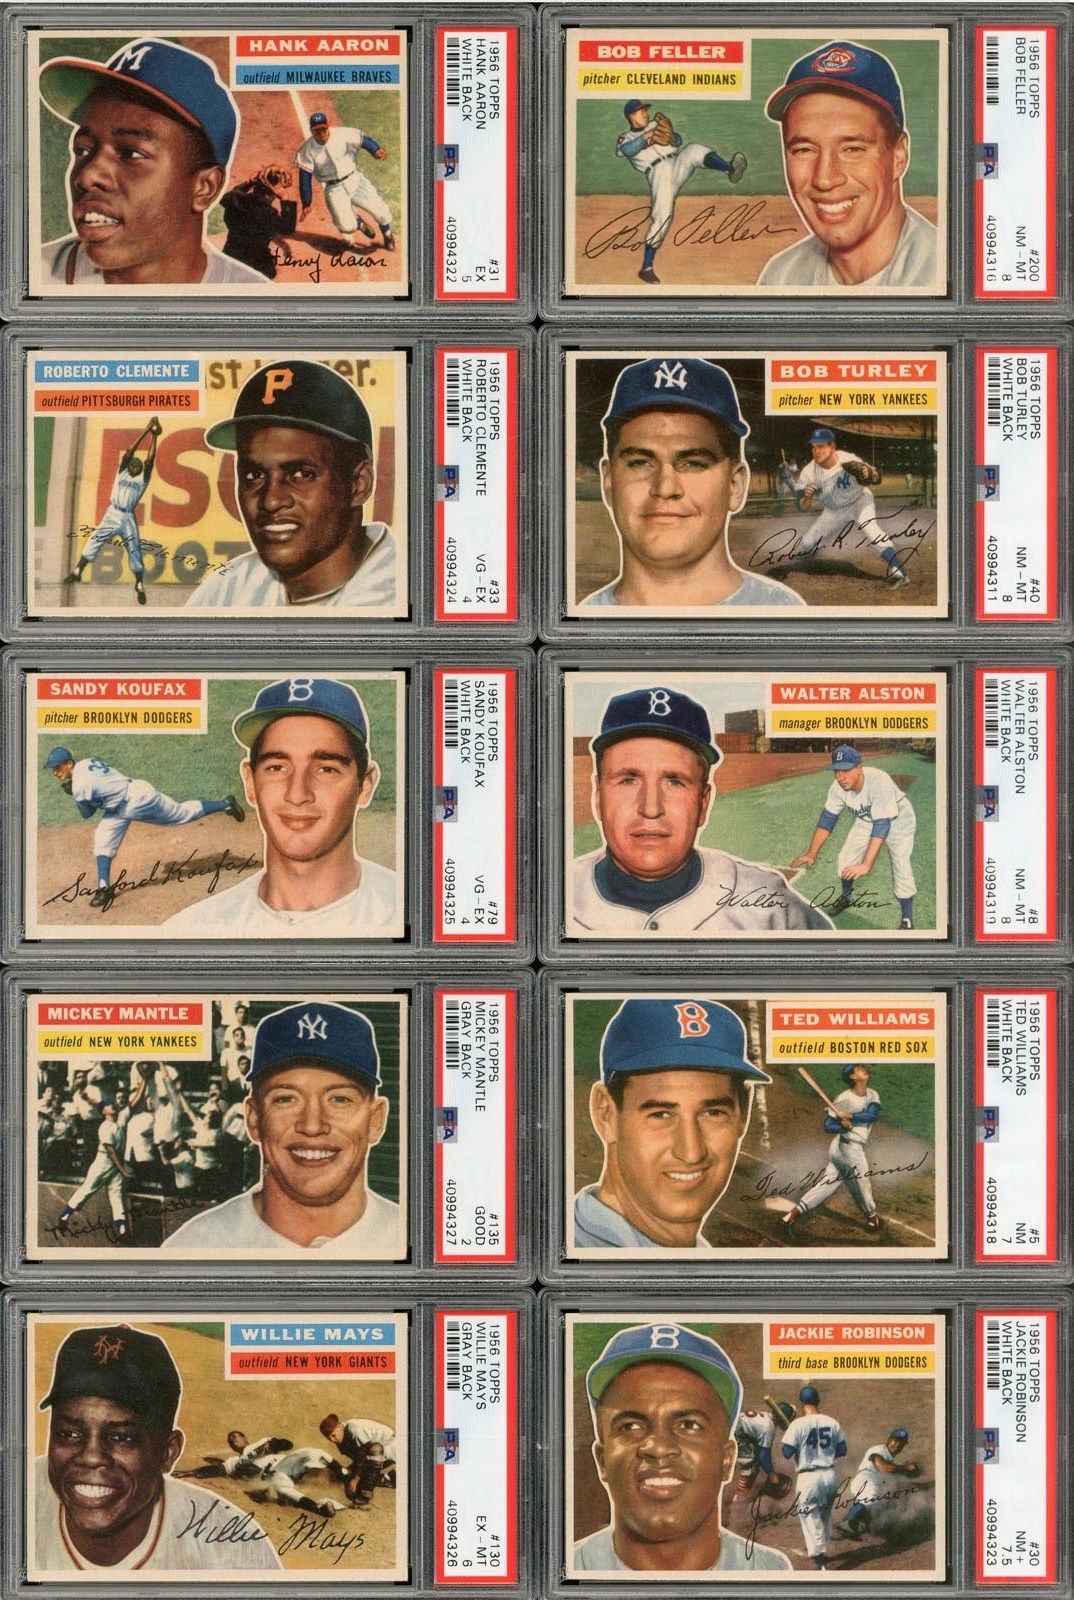 Baseball and Trading Cards - 1956 Topps Baseball Complete Set (340) With Checklist Card